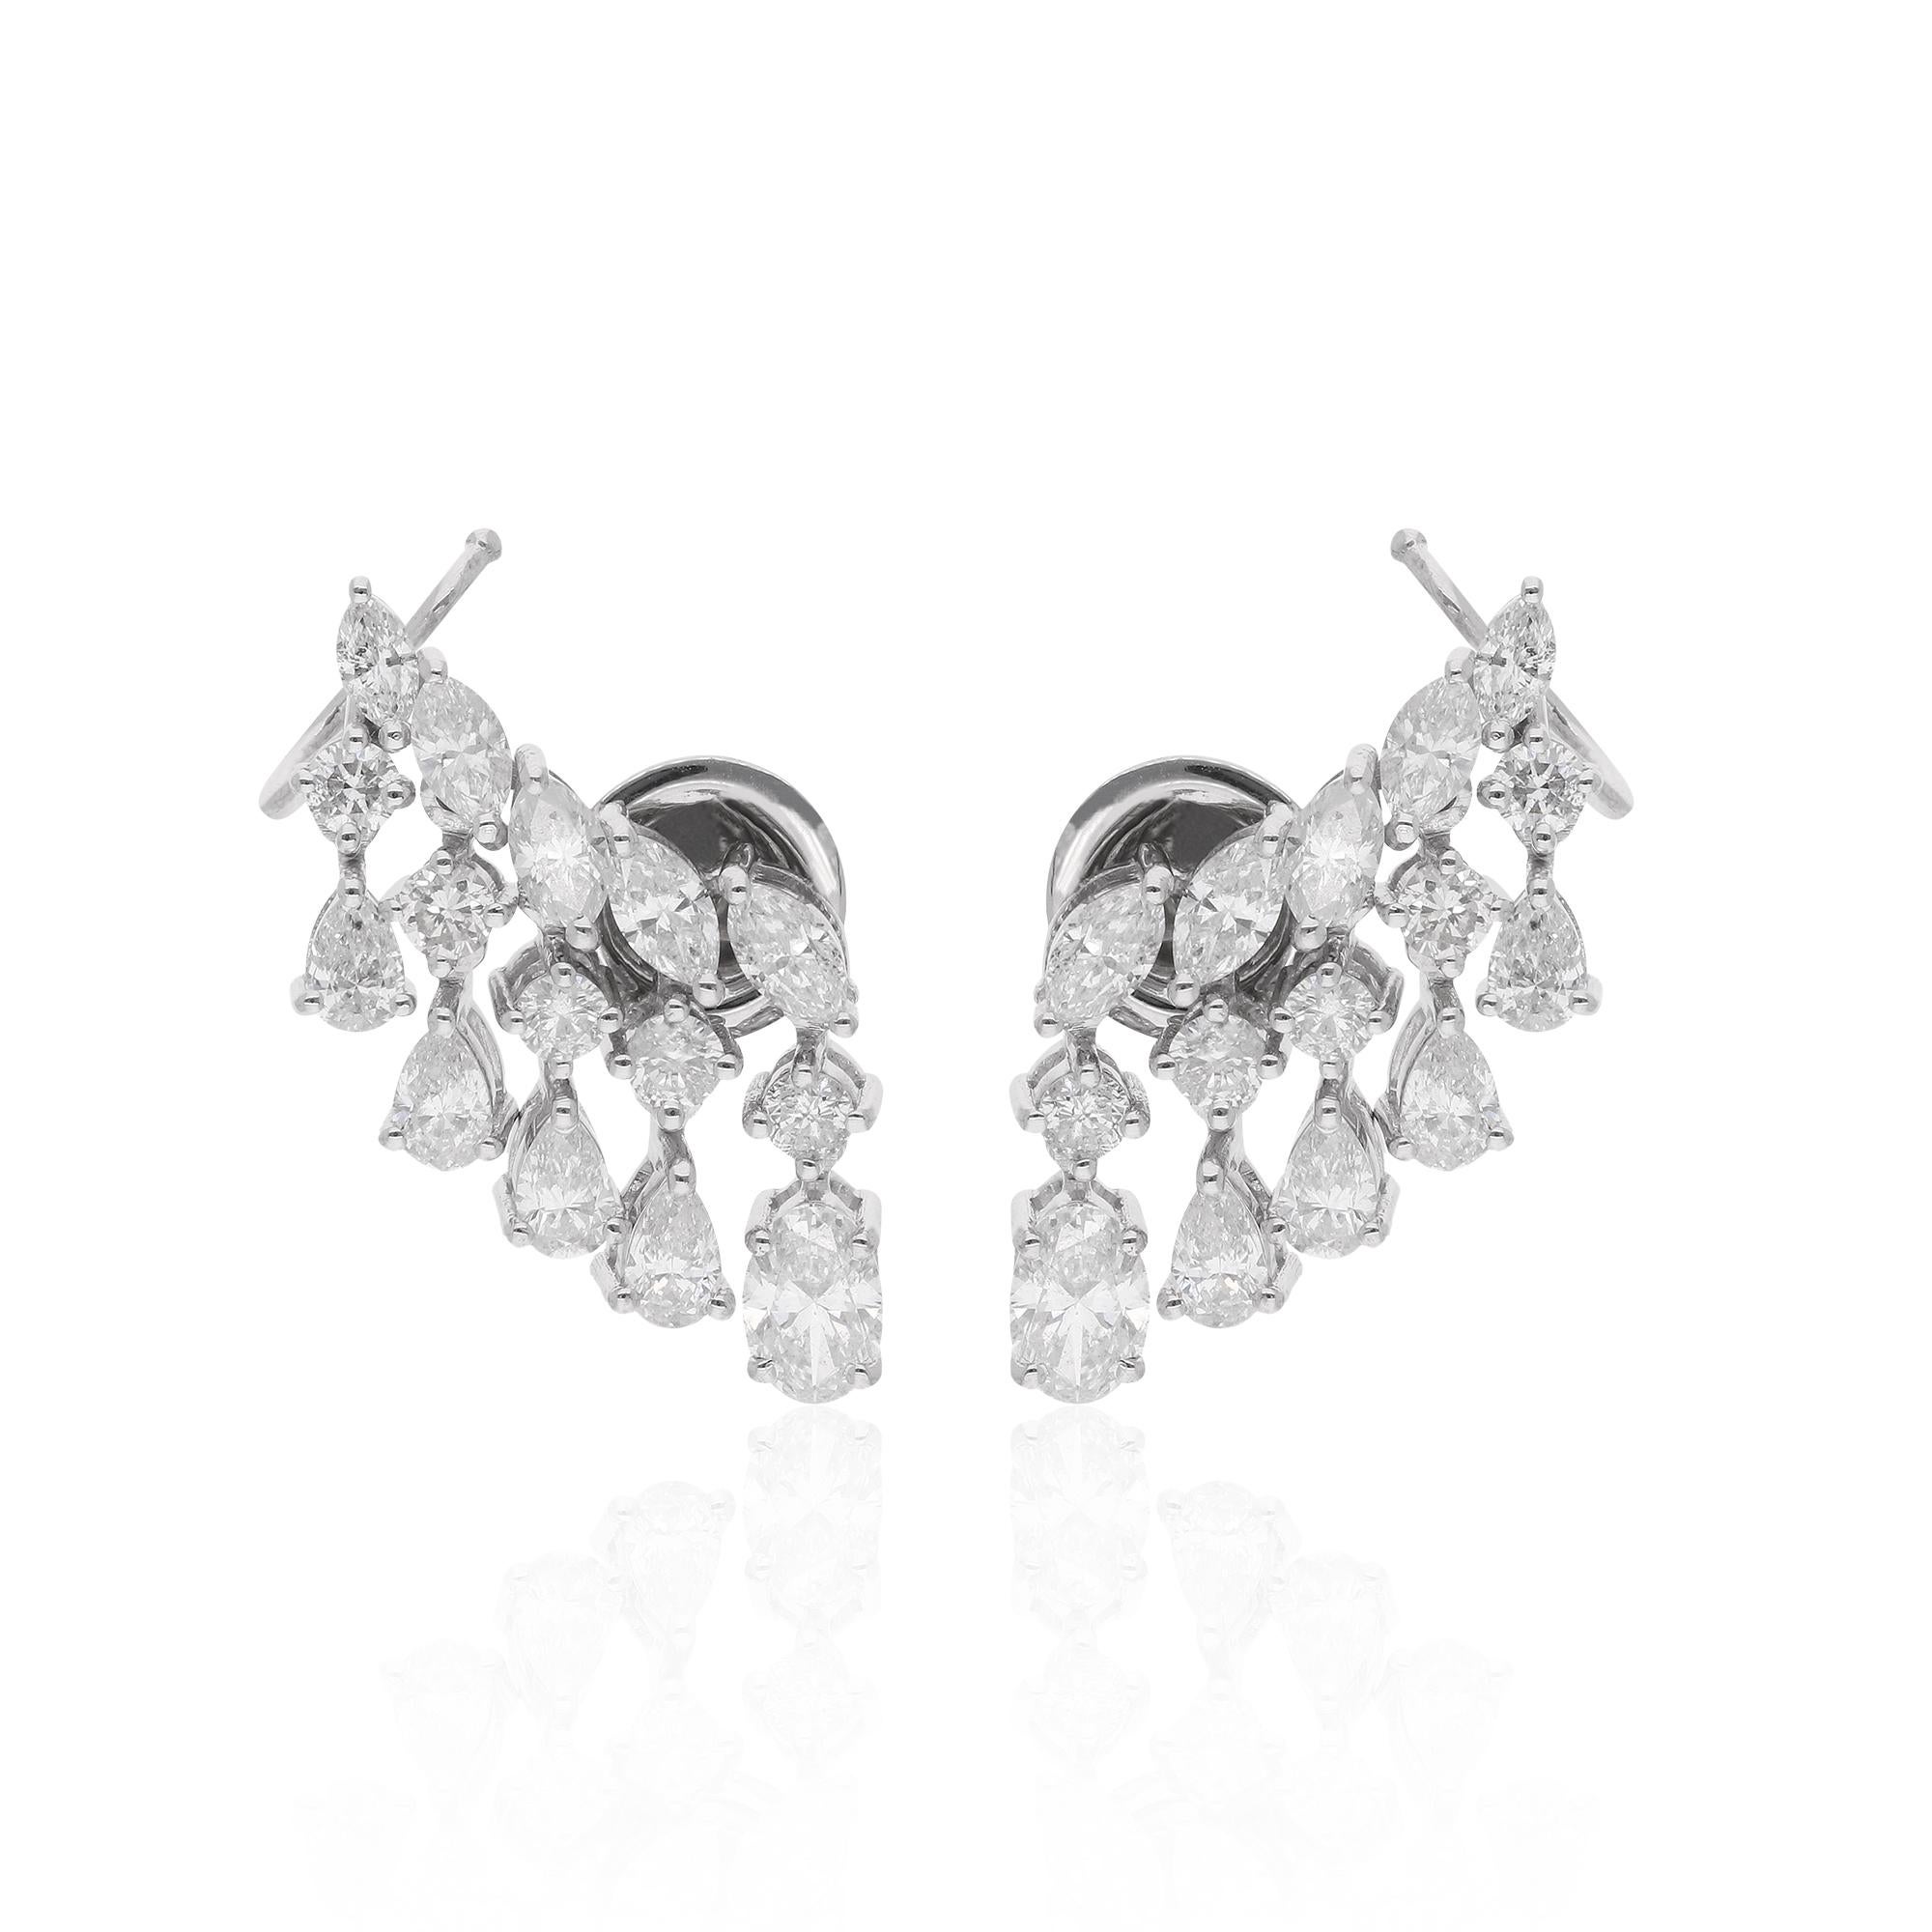 Introducing a dazzling fusion of sophistication and glamour, behold these exquisite Natural Carat Marquise Pear Round Diamond Ear Cuff Earrings, crafted in luxurious 14 karat white gold. These stunning earrings are a true testament to refined taste